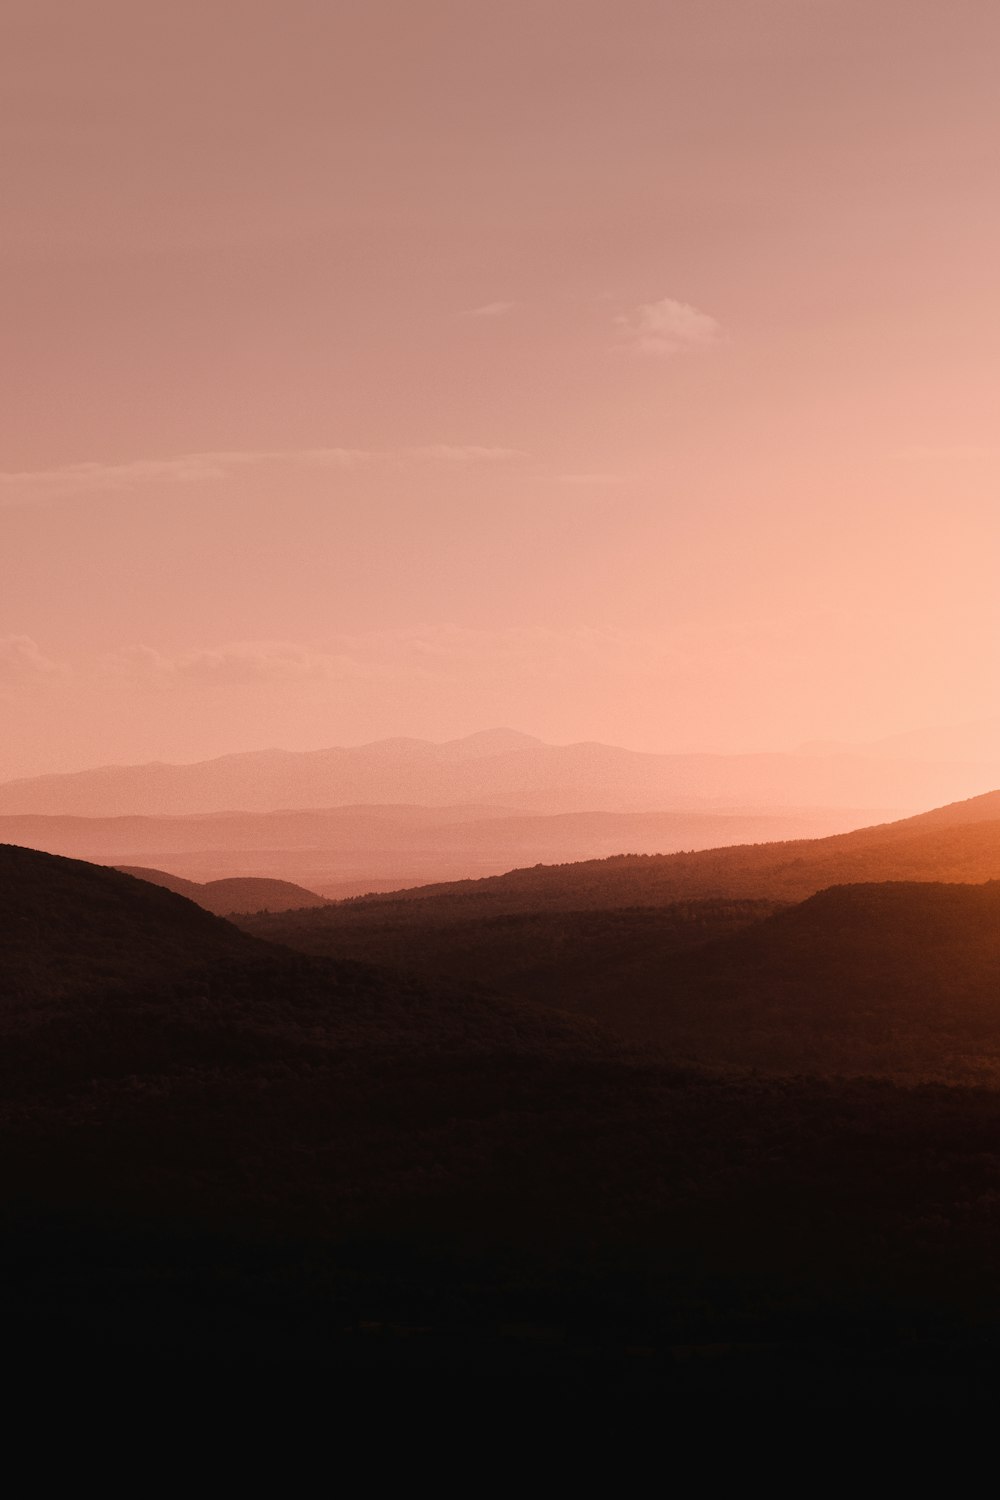 a landscape with hills and a pink sky